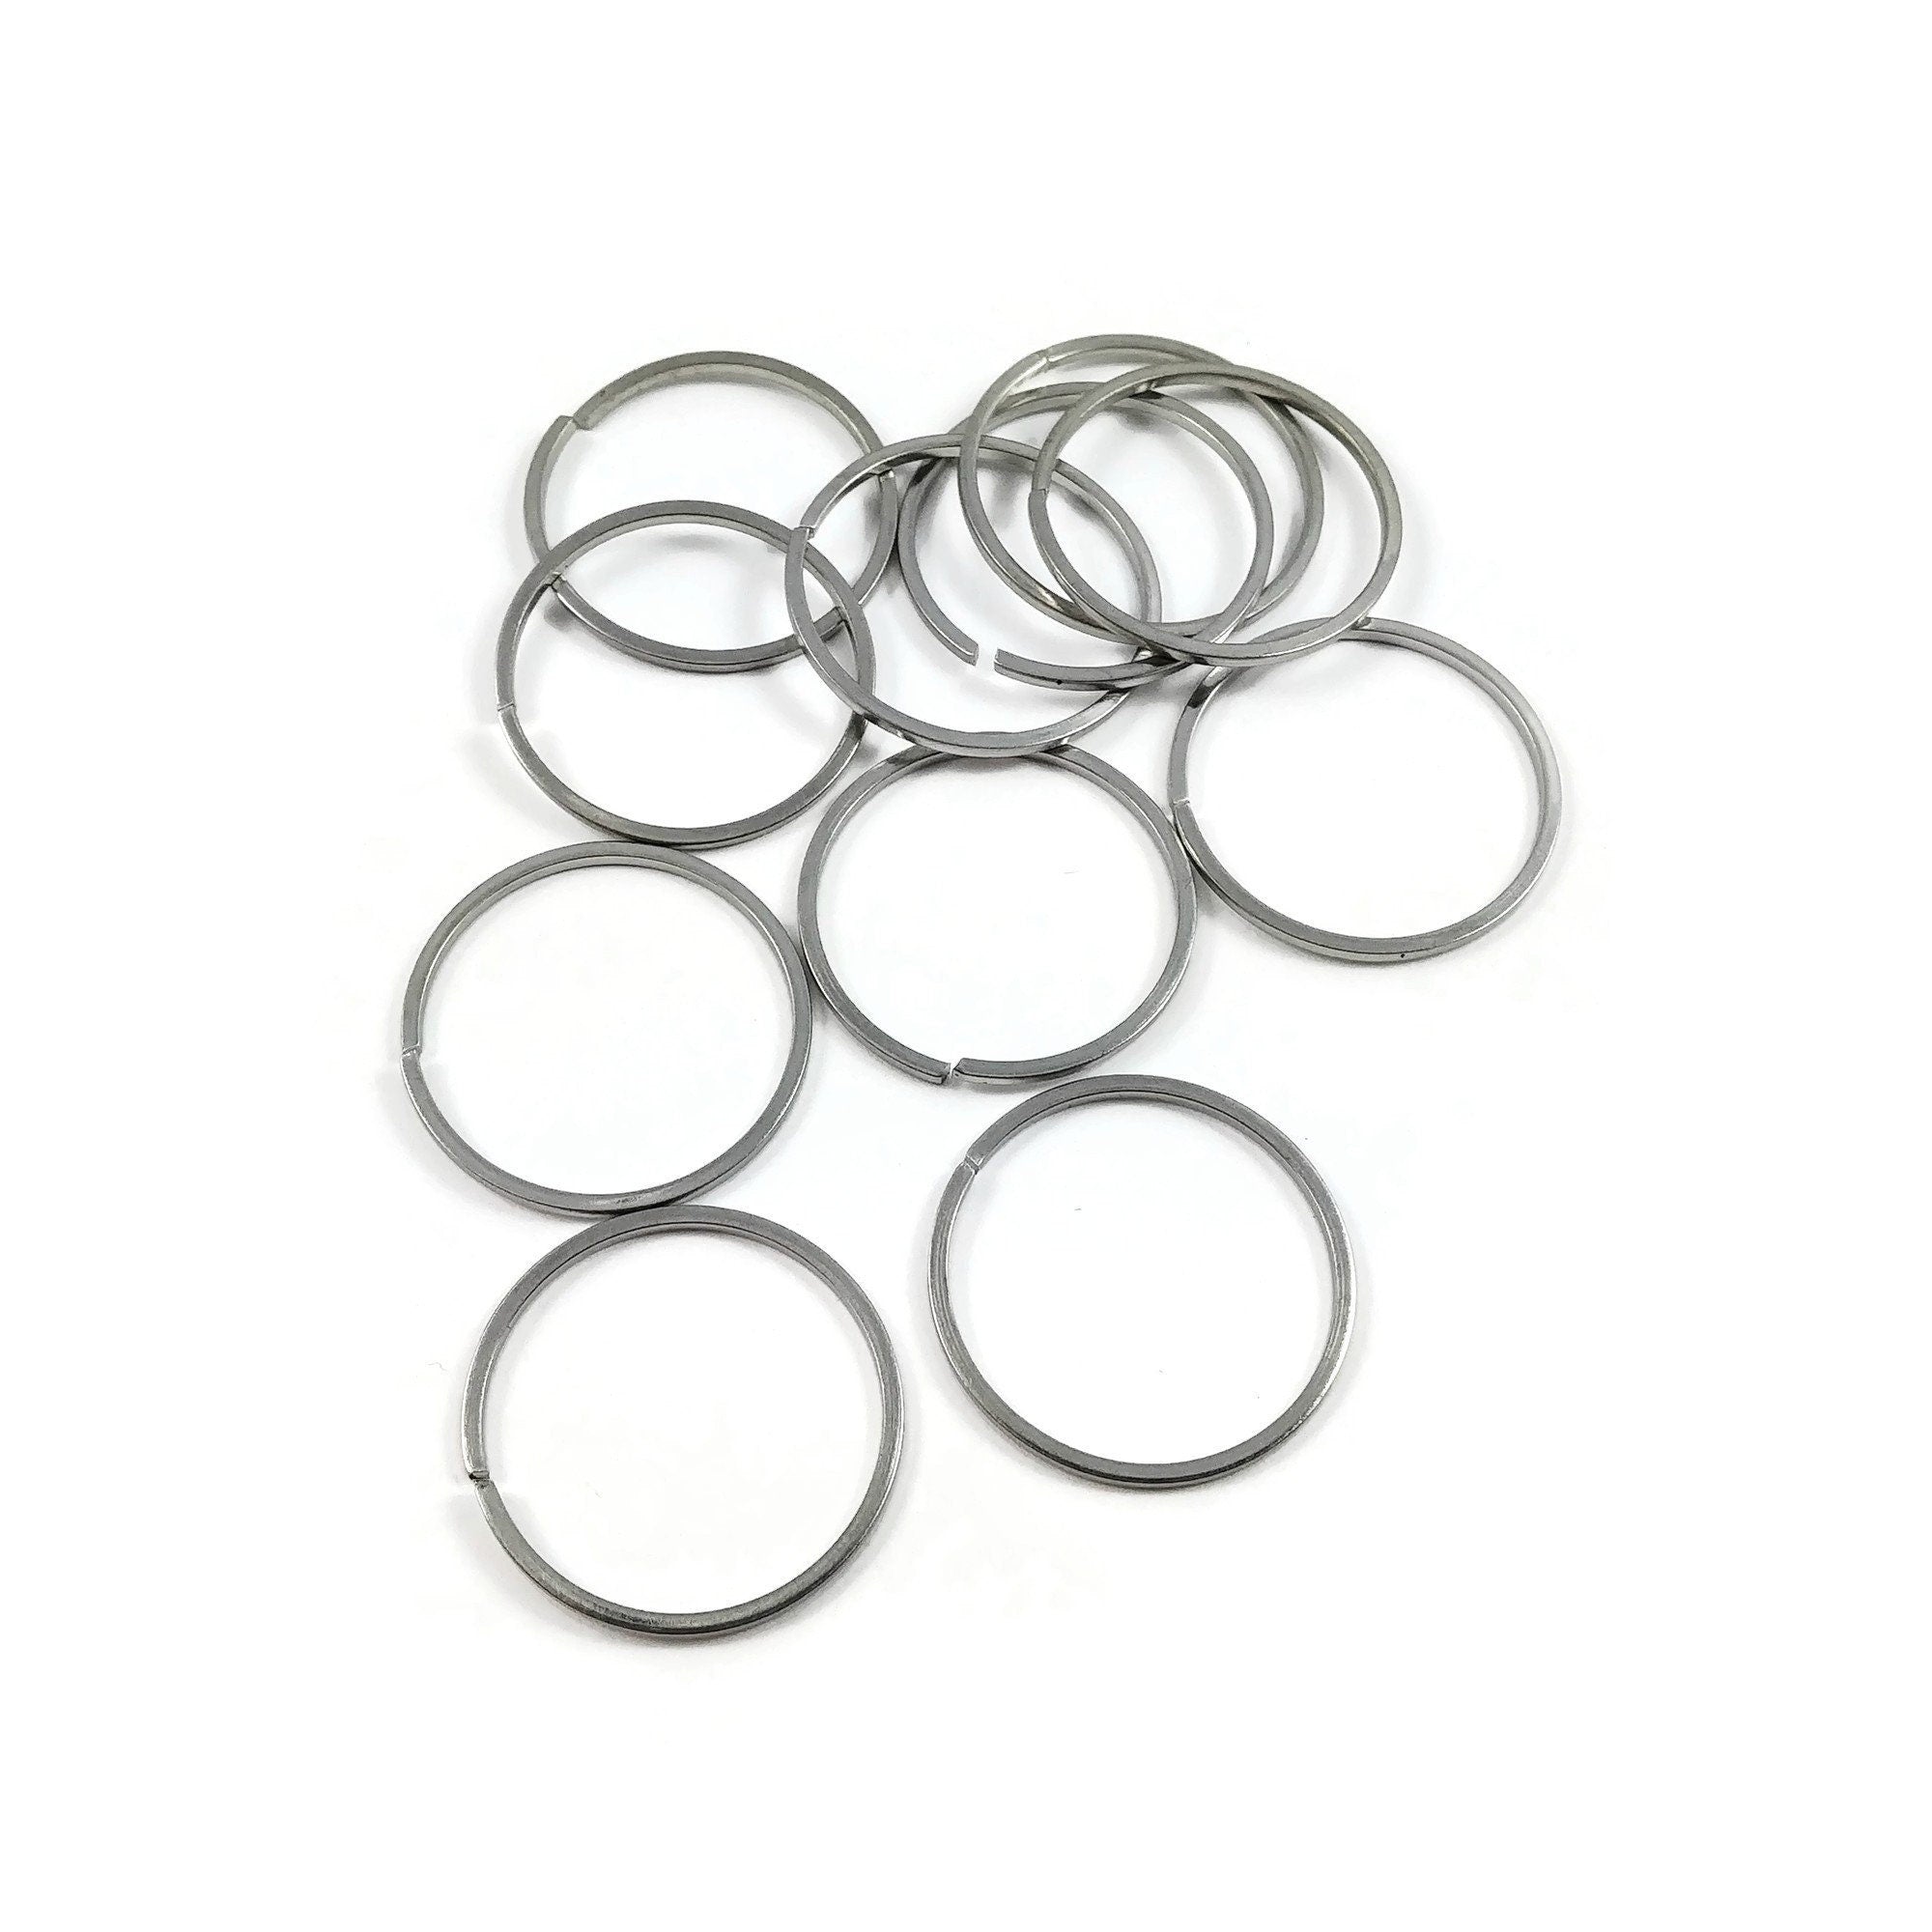 100Pcs 5mm O Ring Connectors Metal Open Jump Rings Golden 304 Stainless  Steel Jump Rings For Jewelry Making Connectors